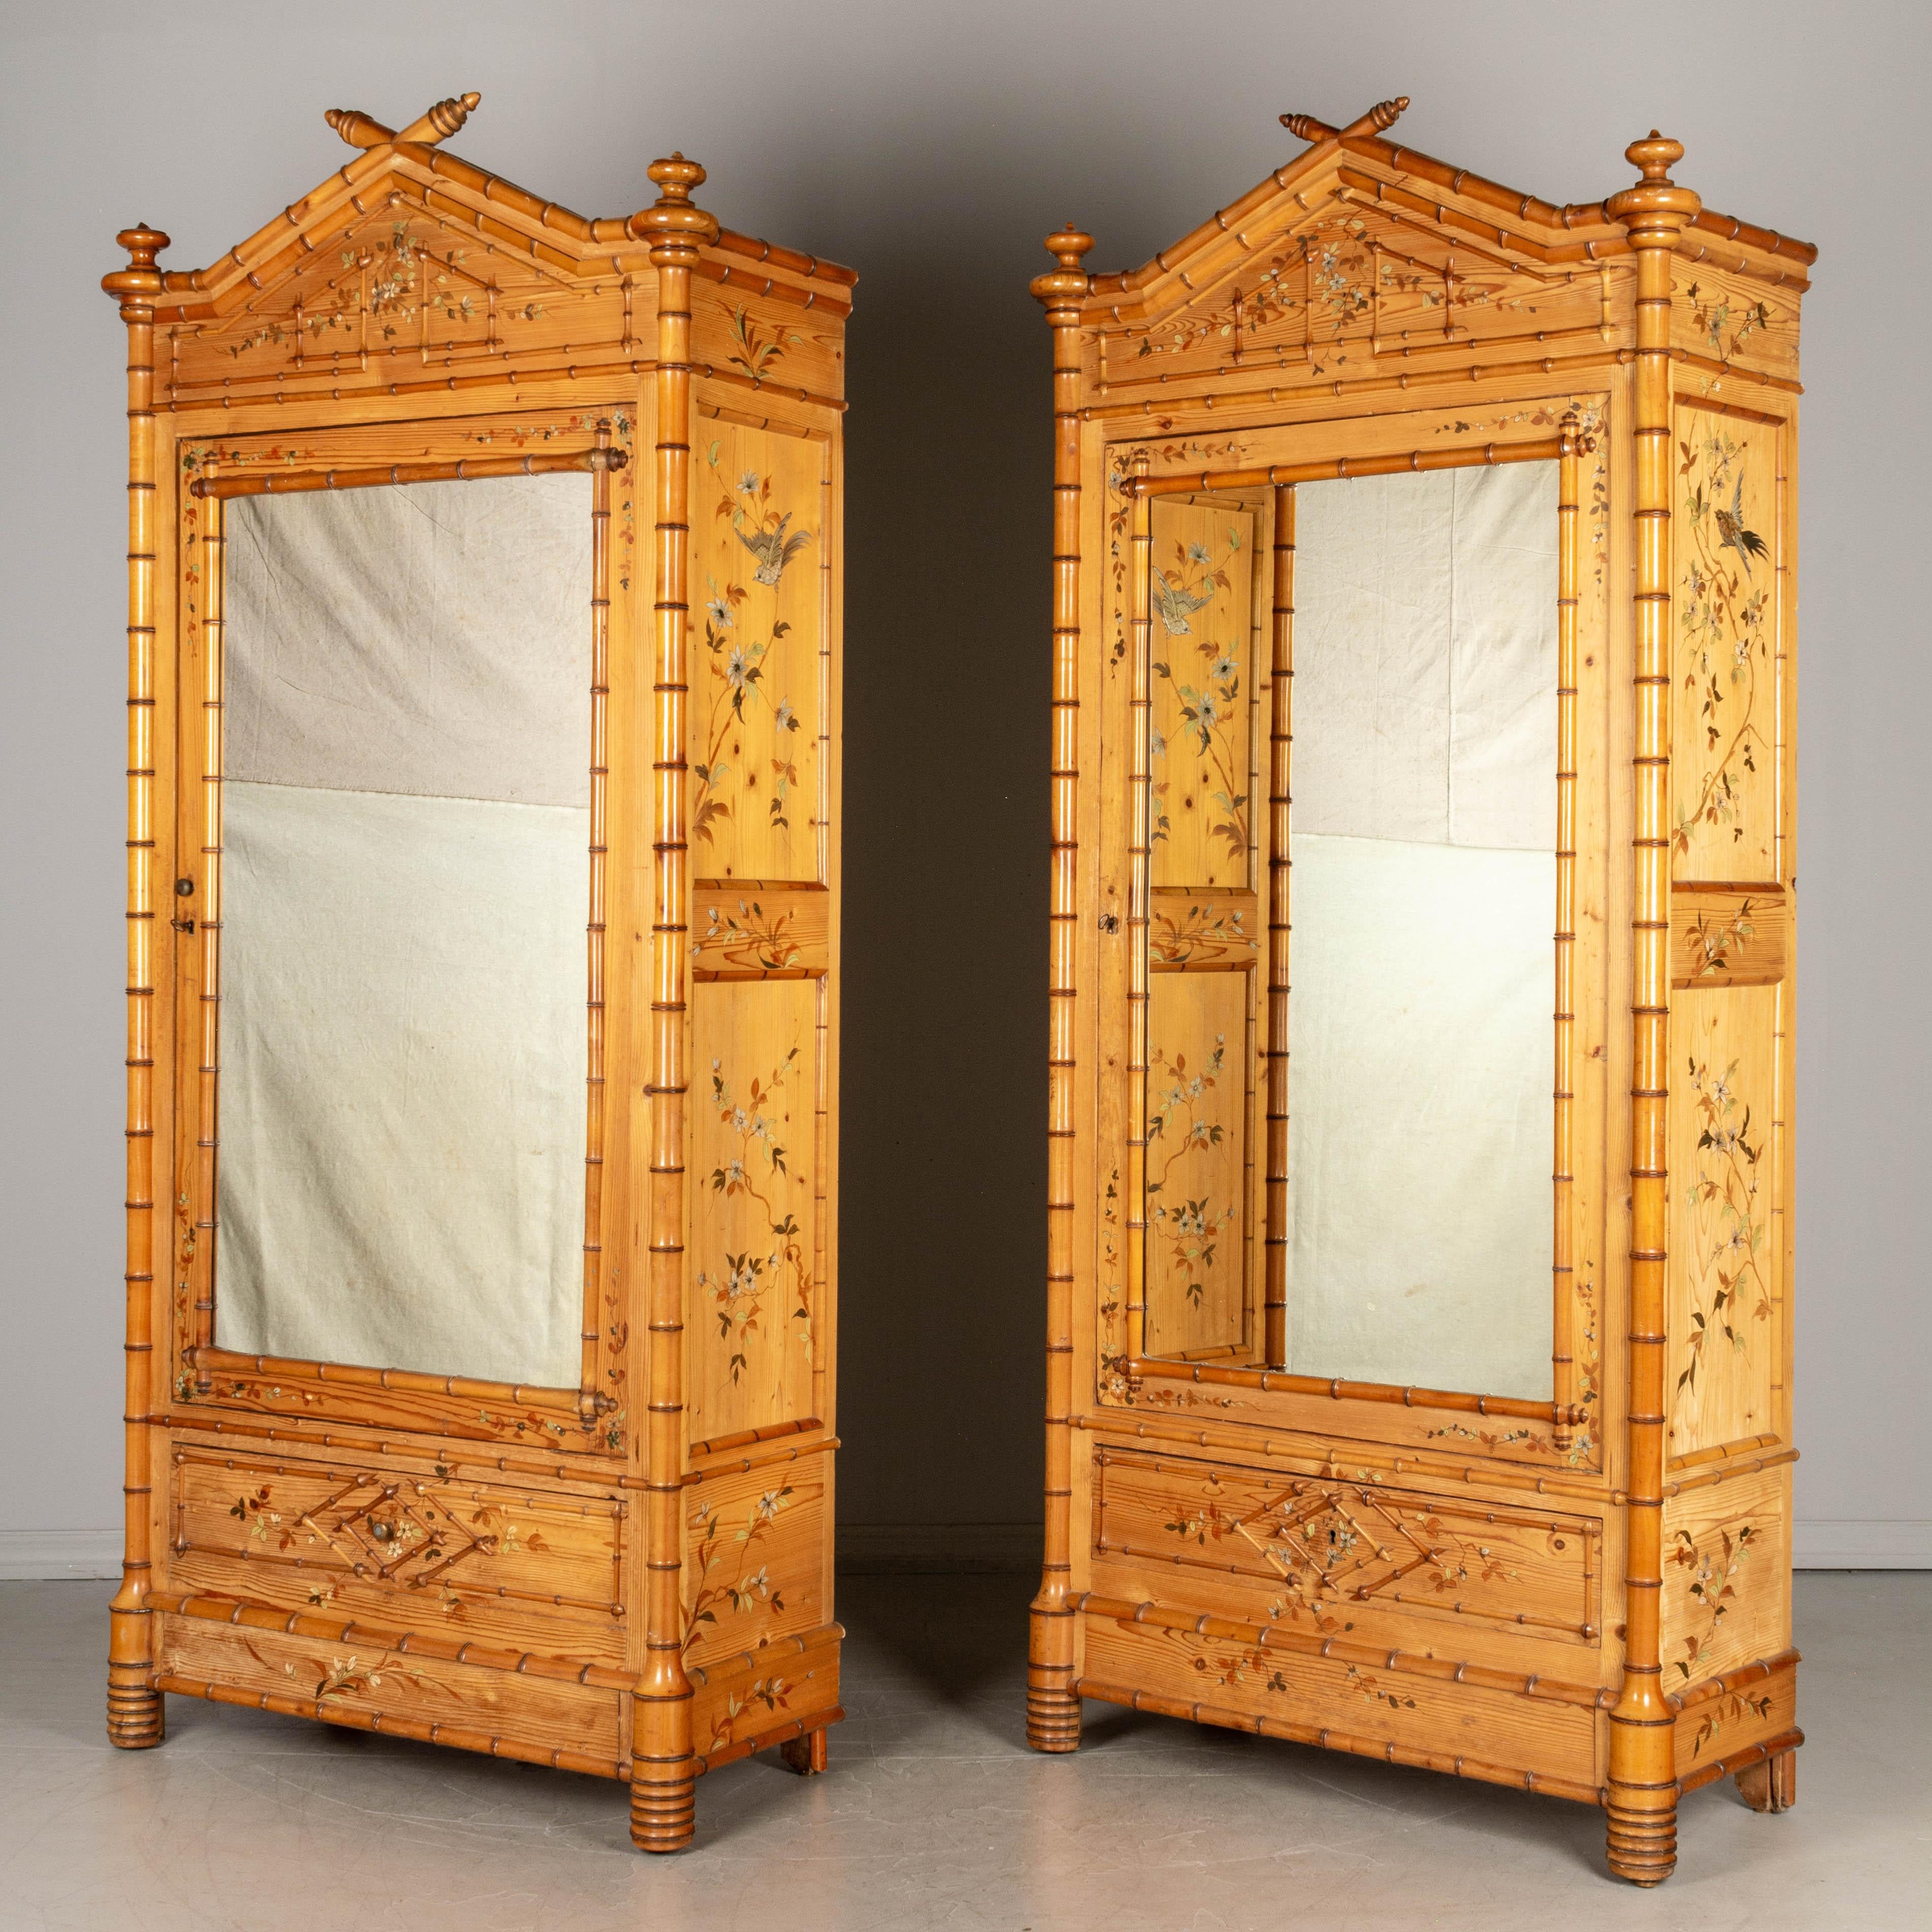 A pair of French faux bamboo armoires, or wardrobes, made of pine with solid cherry faux bamboo details and mirrored door. Hand-painted chinoiserie style decoration: pale green and orange flowering vines and silver birds in raised relief. Turned